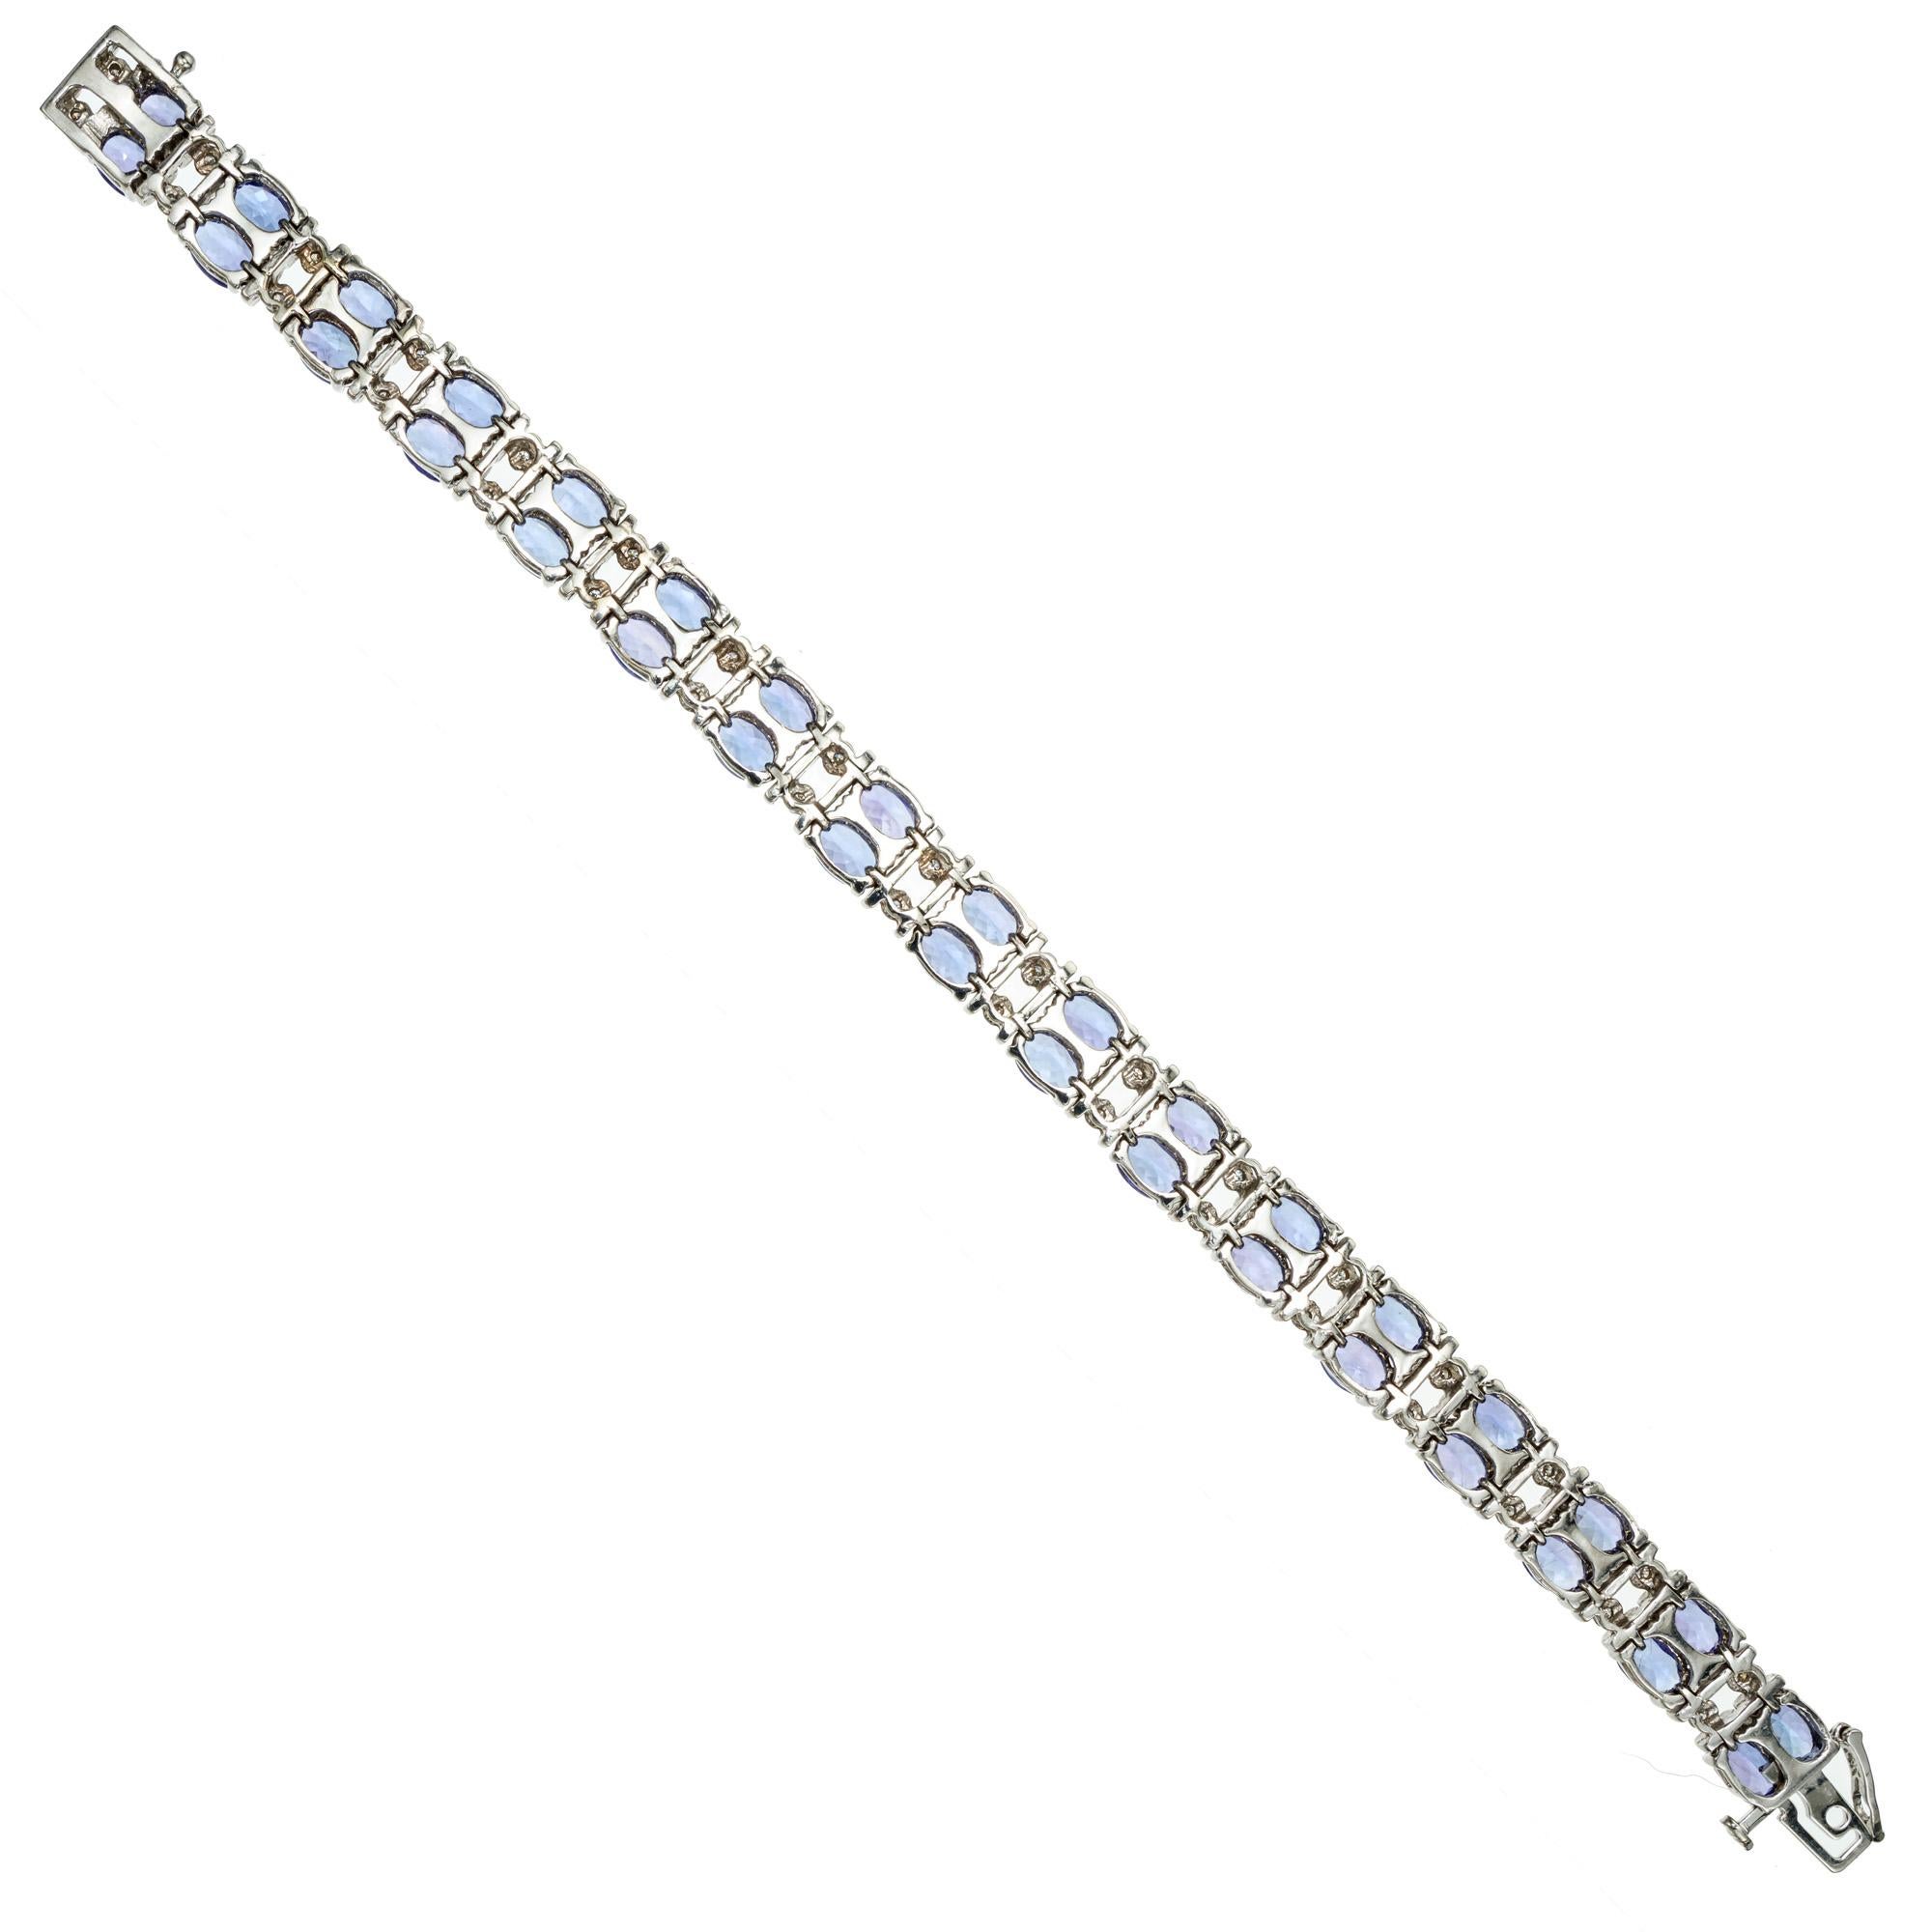 Tanzanite and diamond link bracelet. This spectacular Le Vian bracelet boasts 34 oval tanzanite's in a double row design with each set of tanzanite's spaced by double round cut diamonds set in 14k white gold. The 34 Tanzanite's total approximately